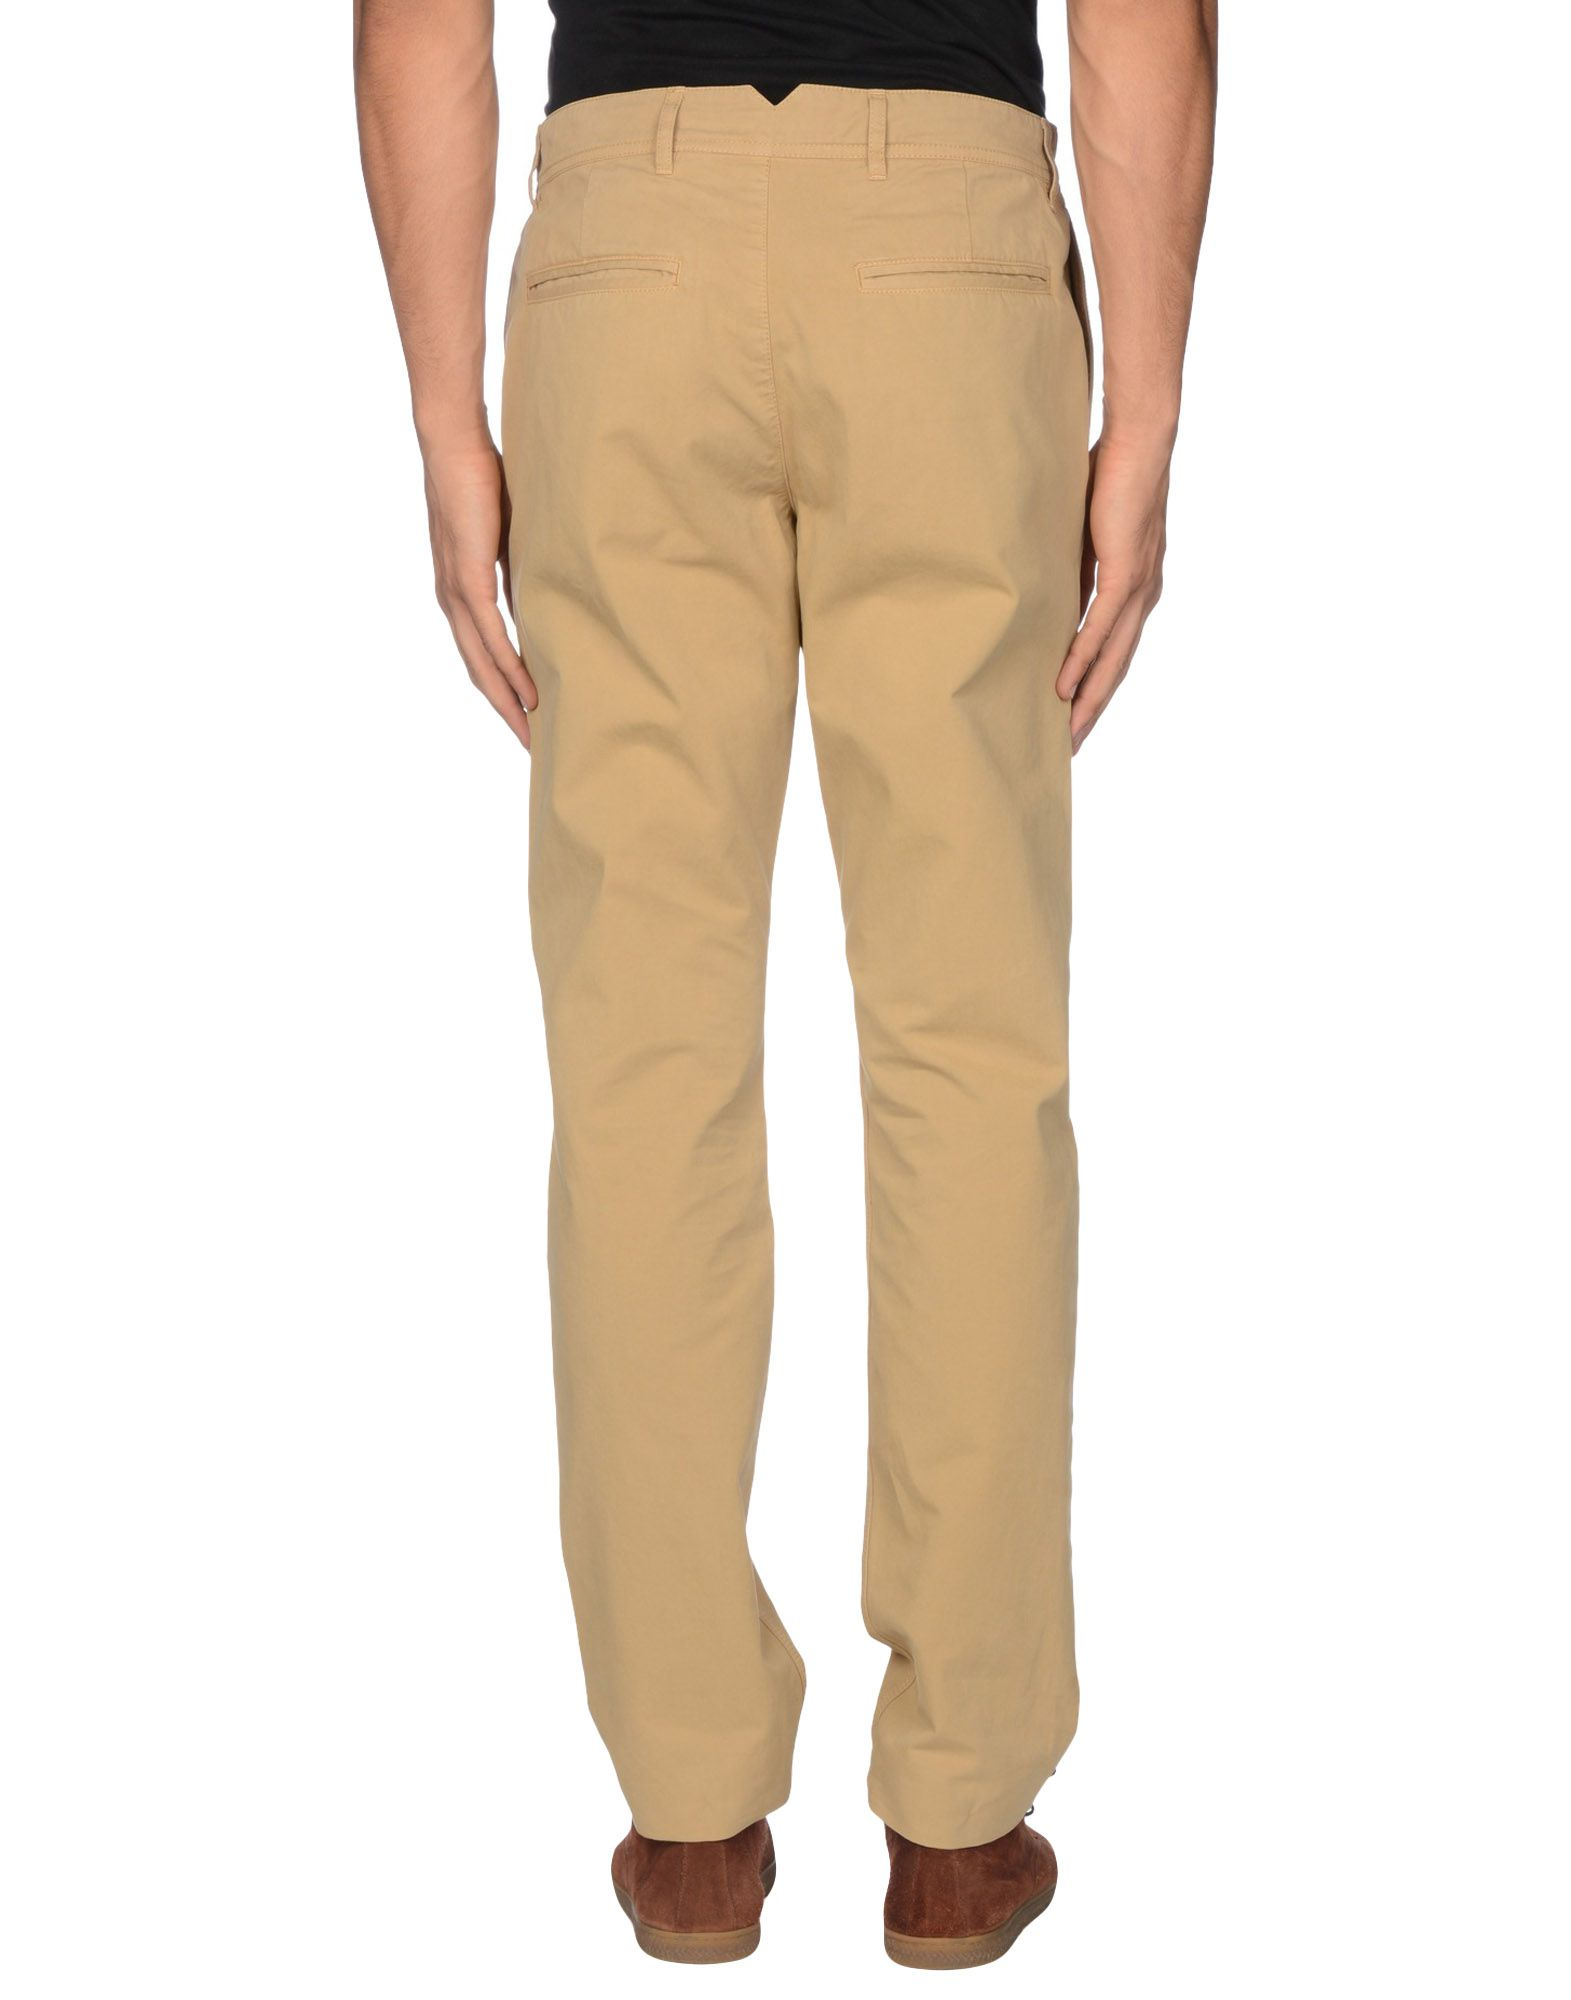 Lyst - Lacoste Casual Trouser in Natural for Men